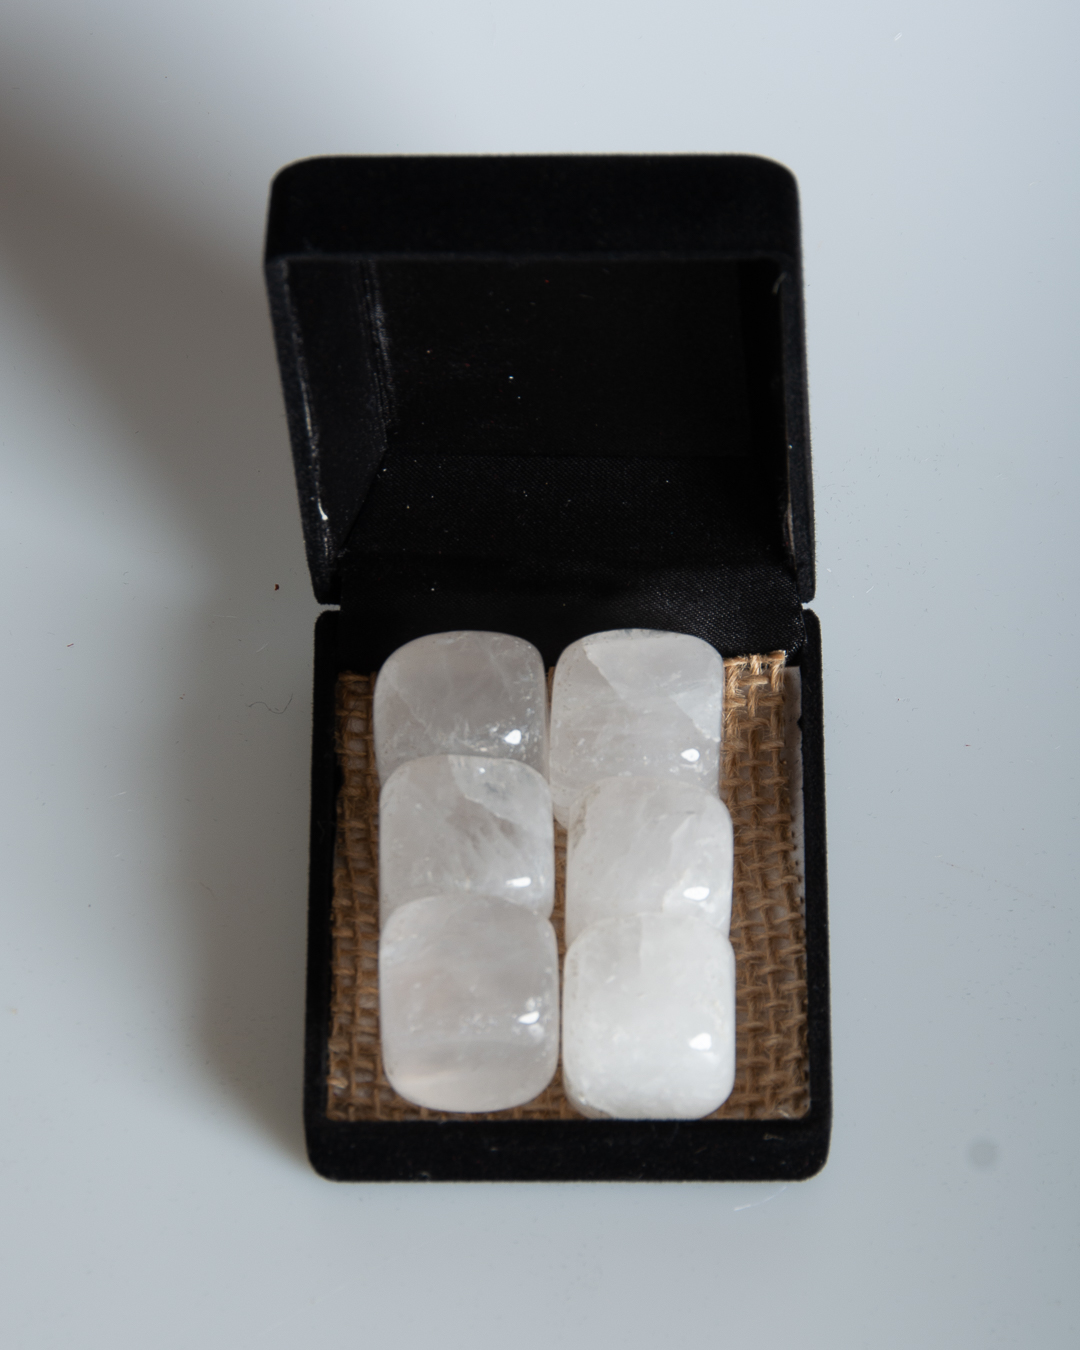 6 Whisky Stone Gemstones in a Clamshell Container